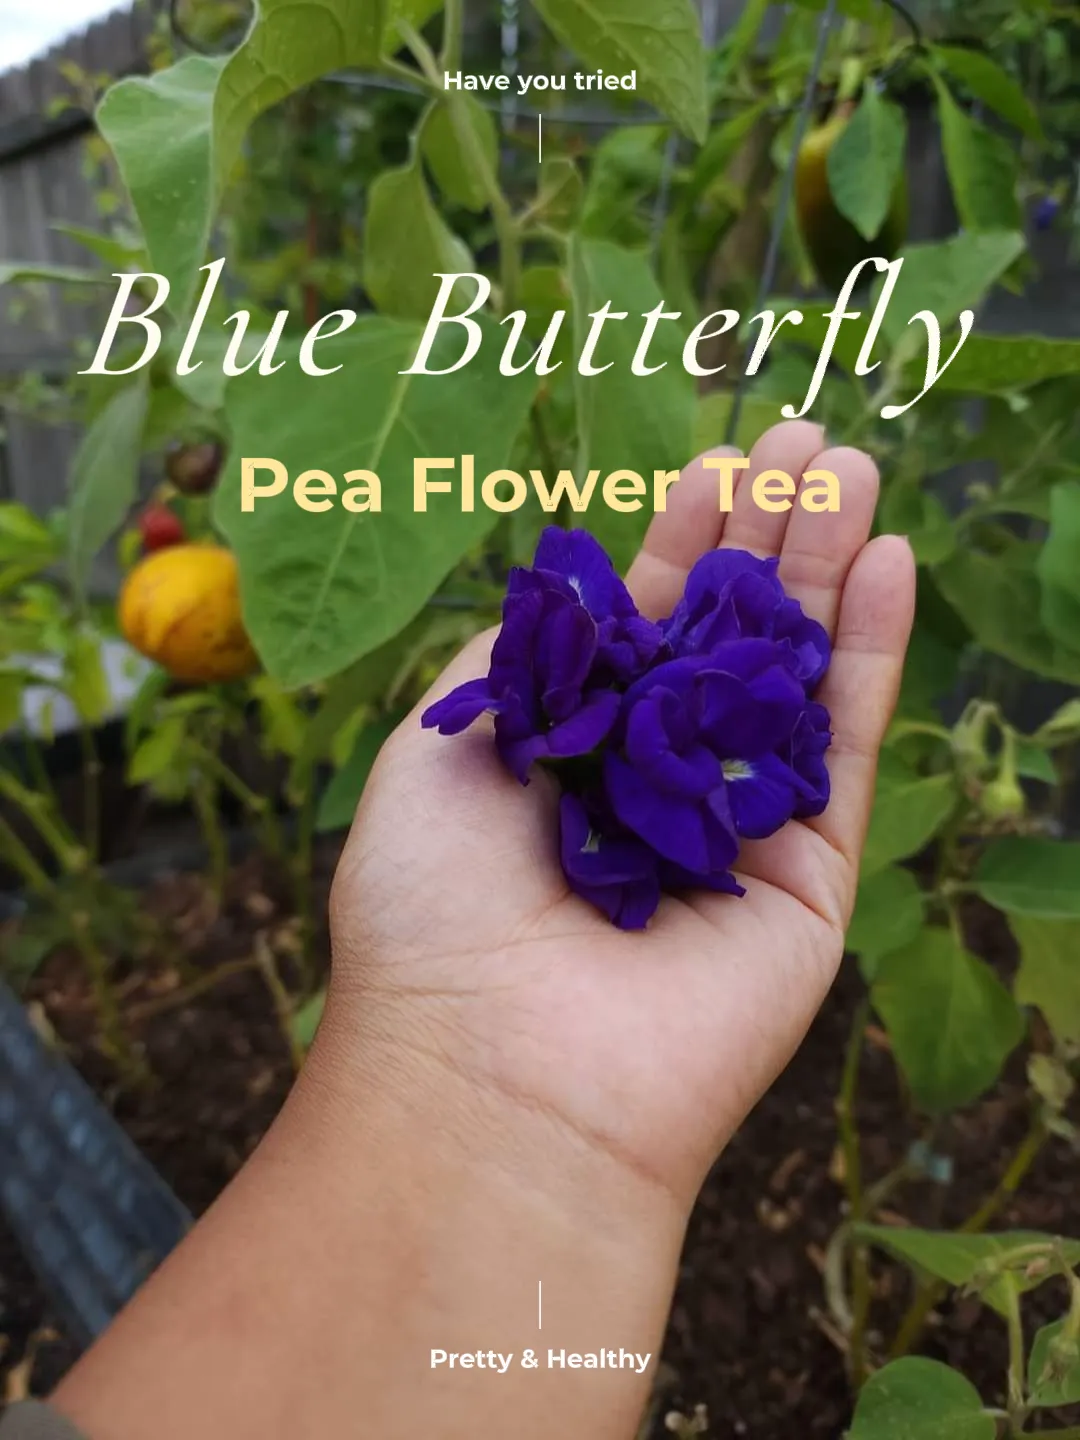 Make Naturally Bright Blue Butterfly Pea Flower Tea - Garden Therapy